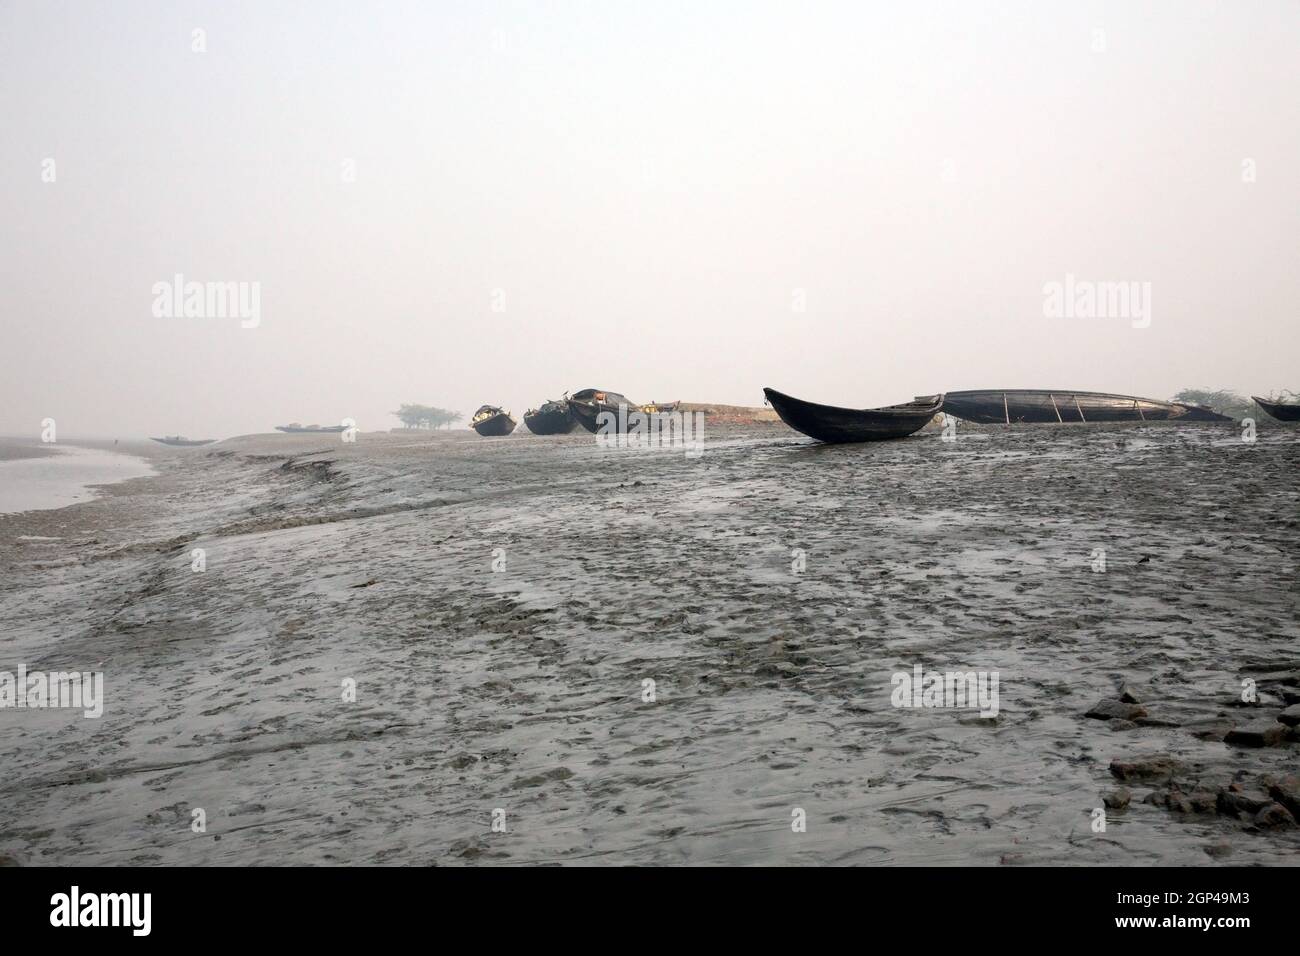 Boats of fishermen stranded in the mud at low tide on the river Matla near Canning Town, India Stock Photo